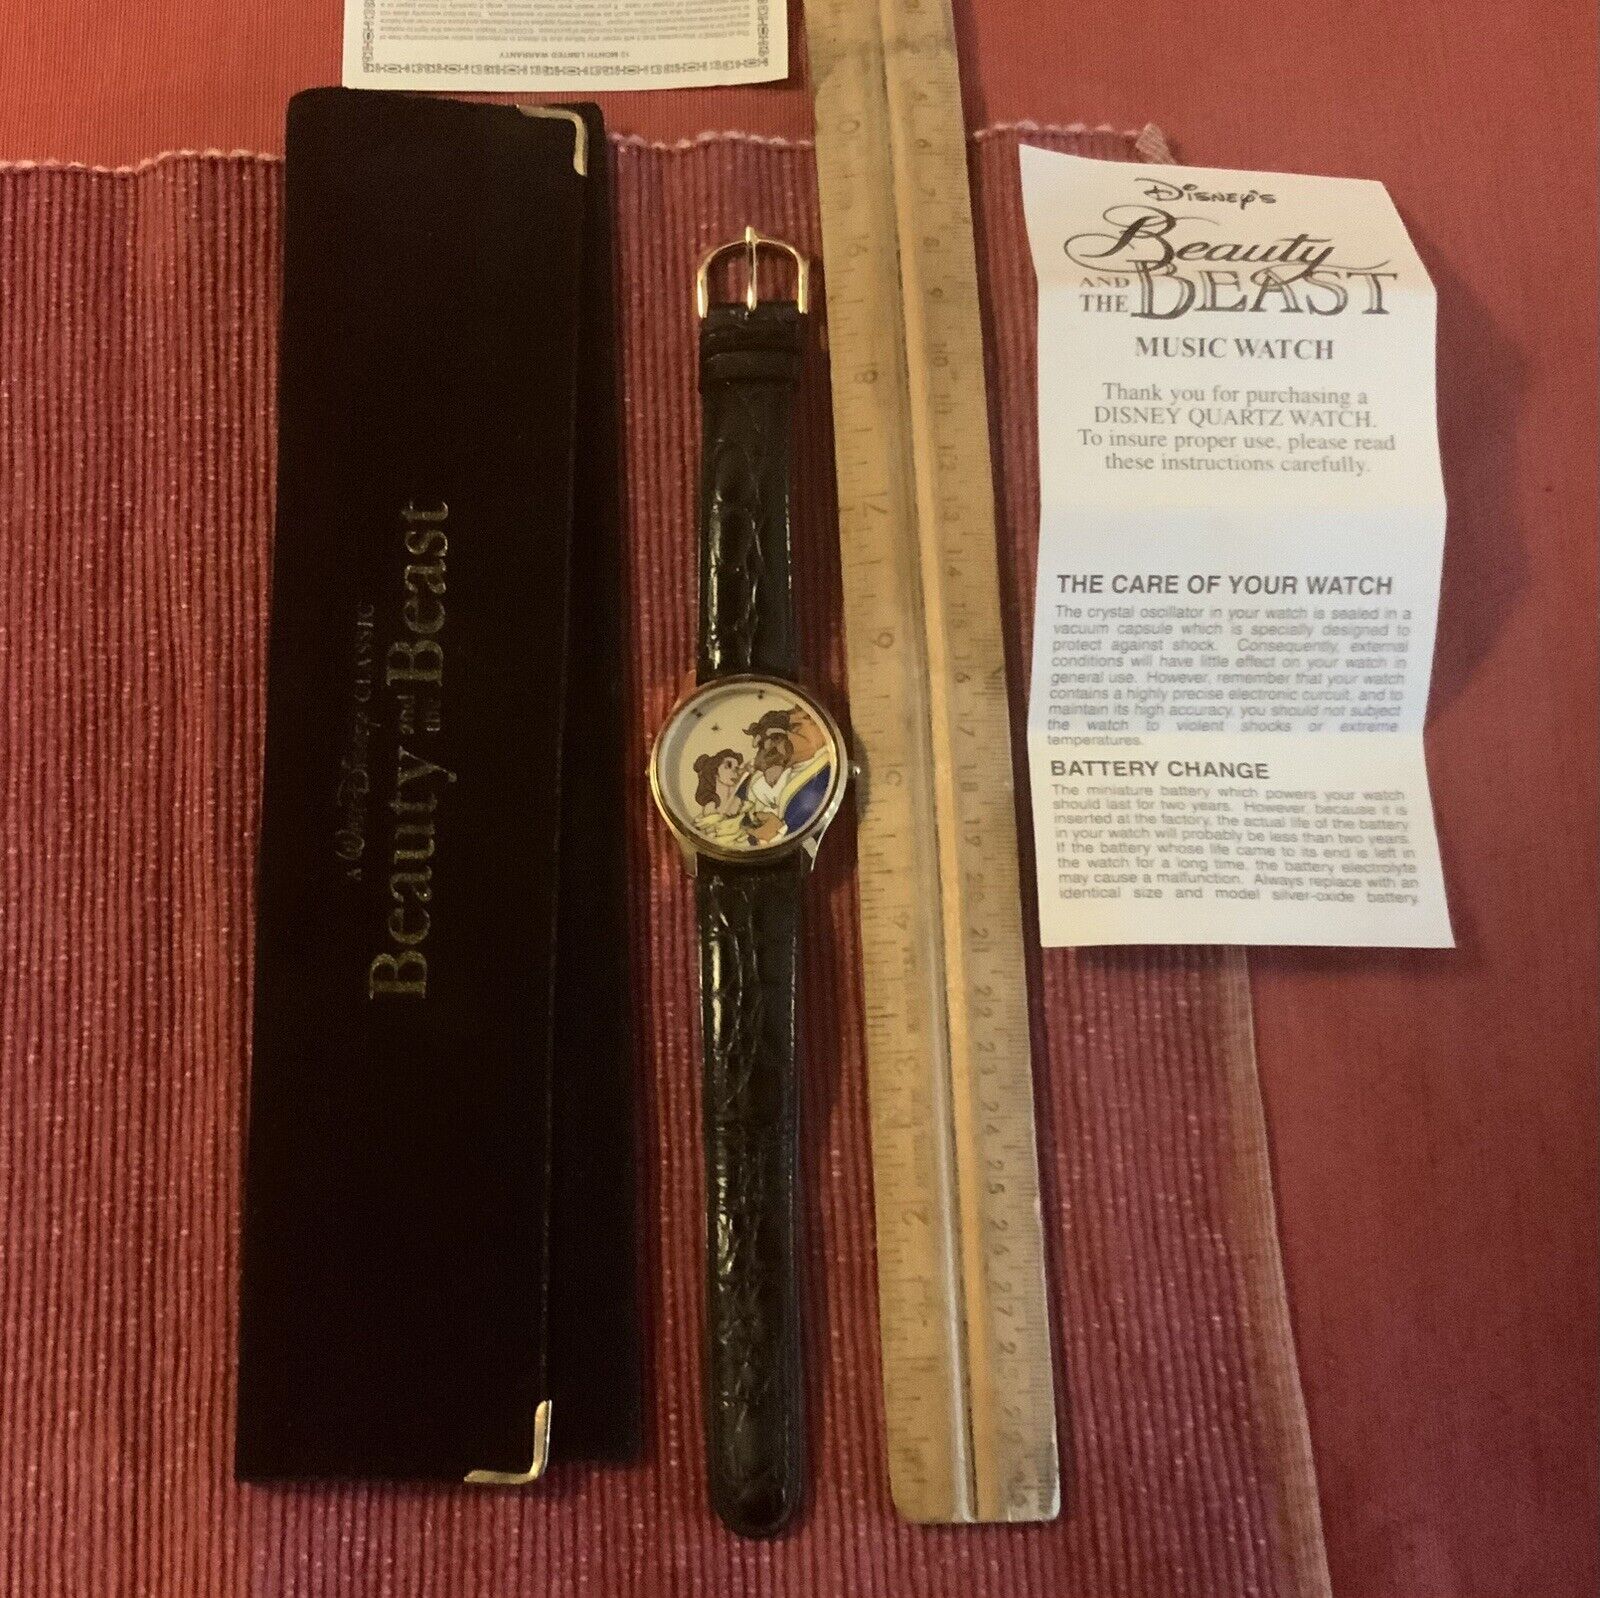 Vintage Disney Beauty and the Beast Music Watch Never Used